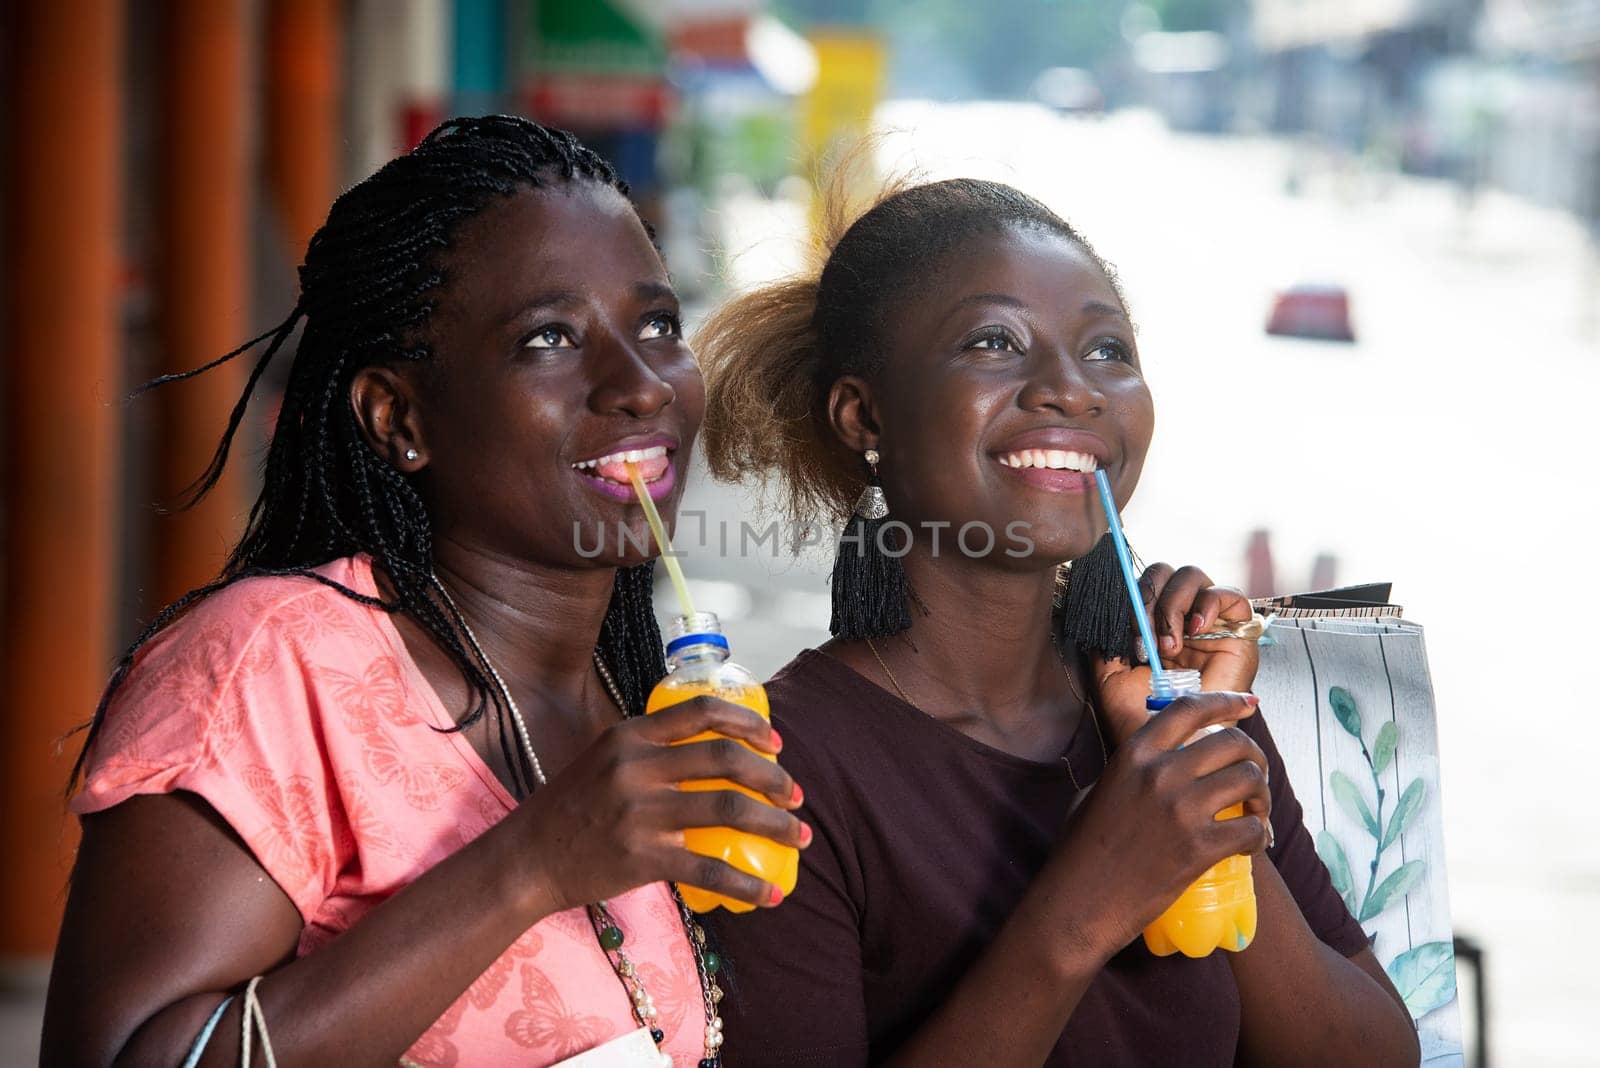 Young girls standing outdoors looking at something up there smiling with shopping bags and bottles of juice in hand.